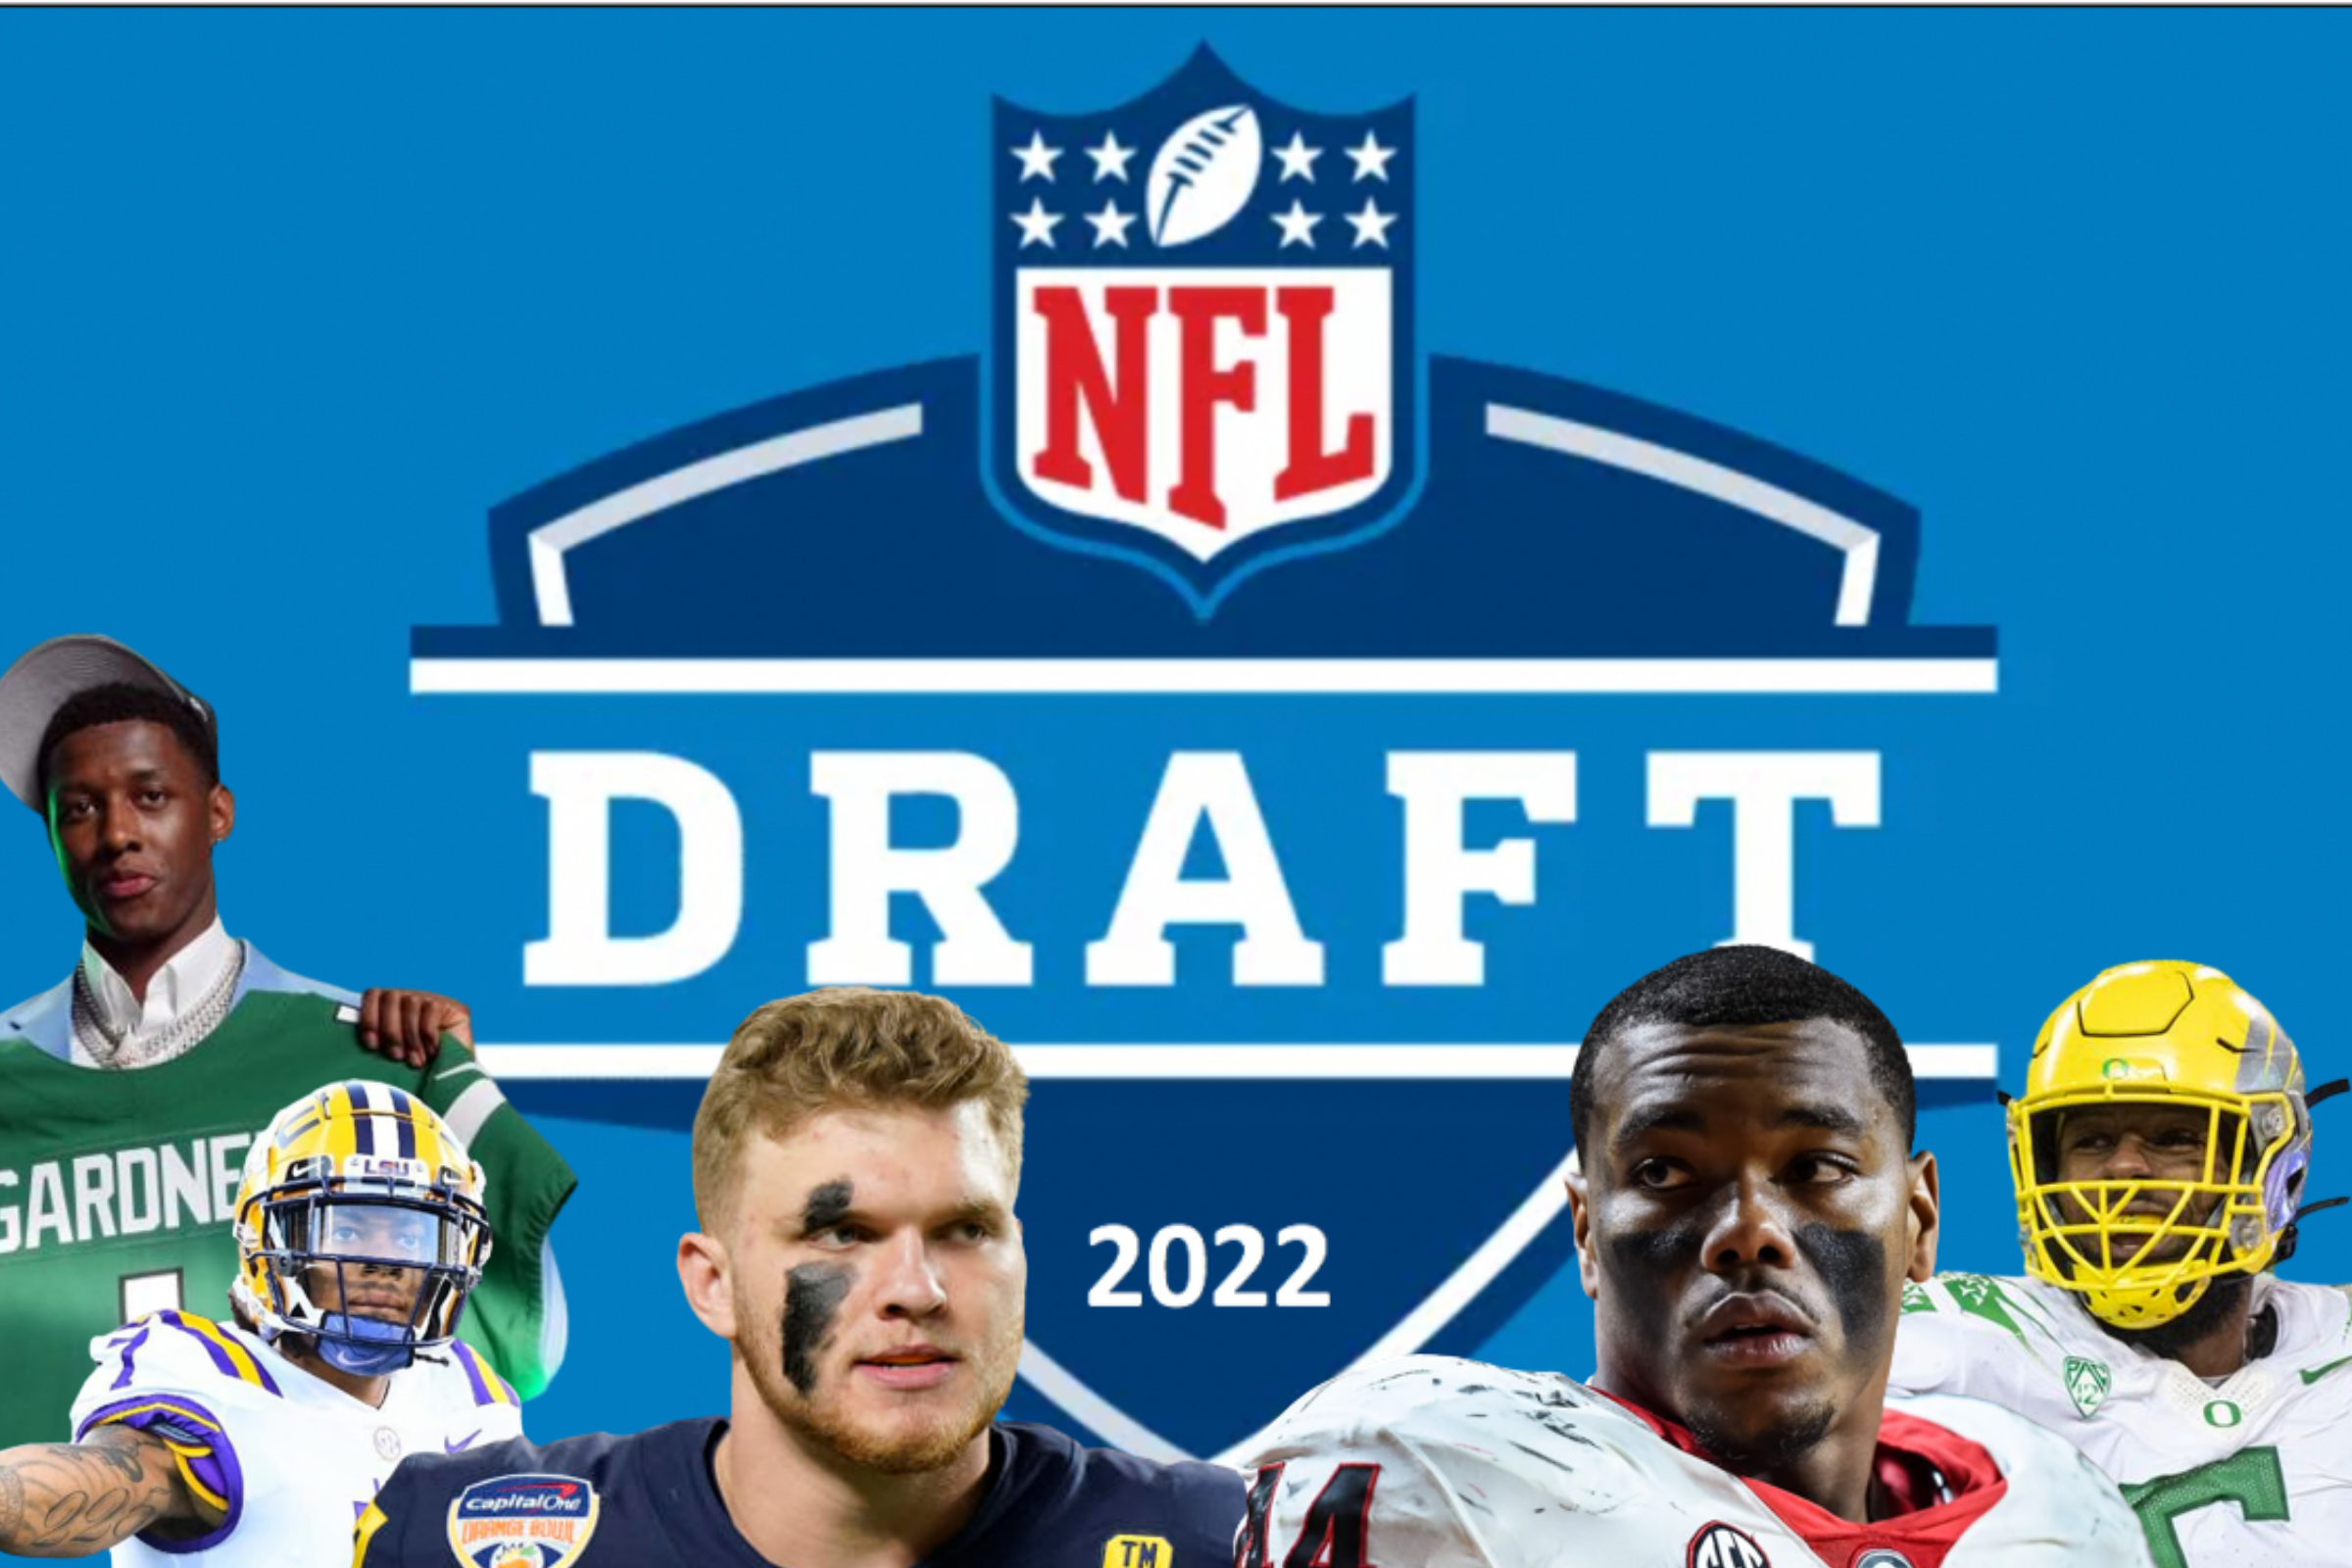 Predictions & Comparisons for the Top 5 picks of the 2022 NFL Draft